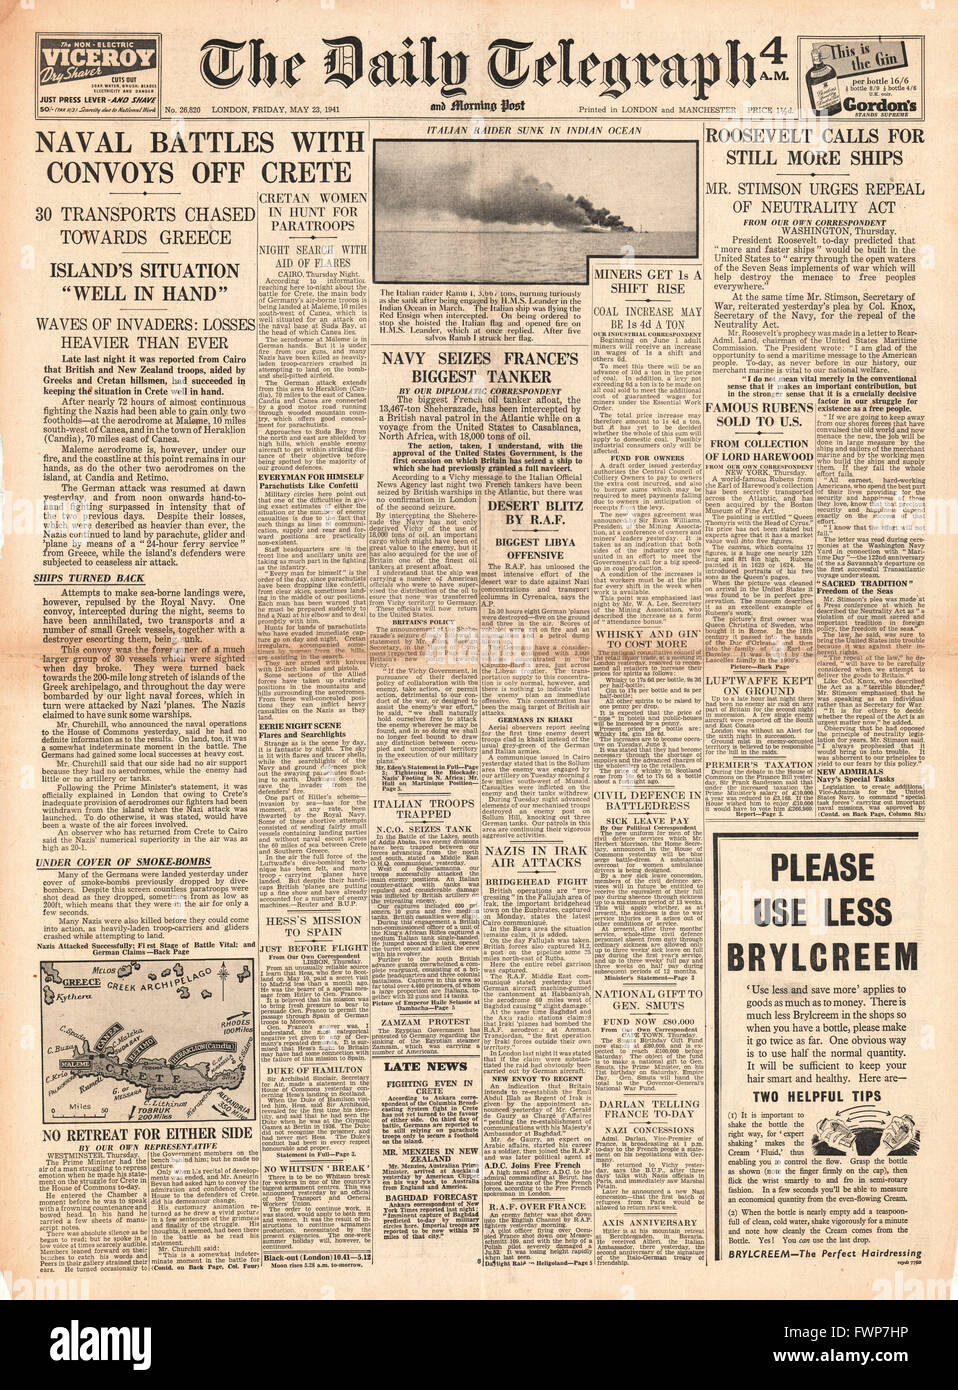 1941 front page Daily Telegraph Battle for Crete, Royal Navy seize French oil tanker Sheherazade and Roosevelt calls for more ships Stock Photo